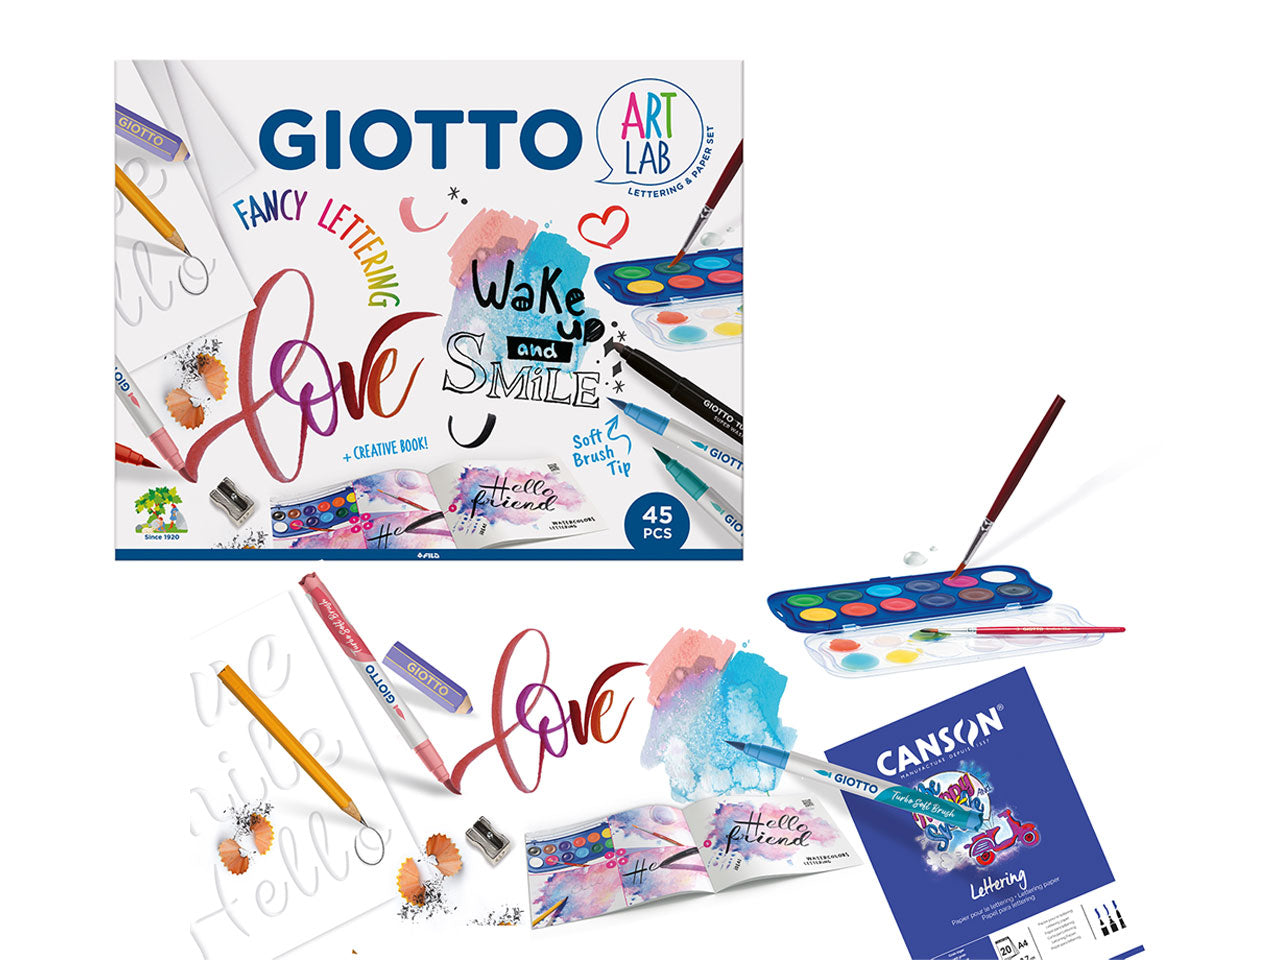 Giotto art lab fancy